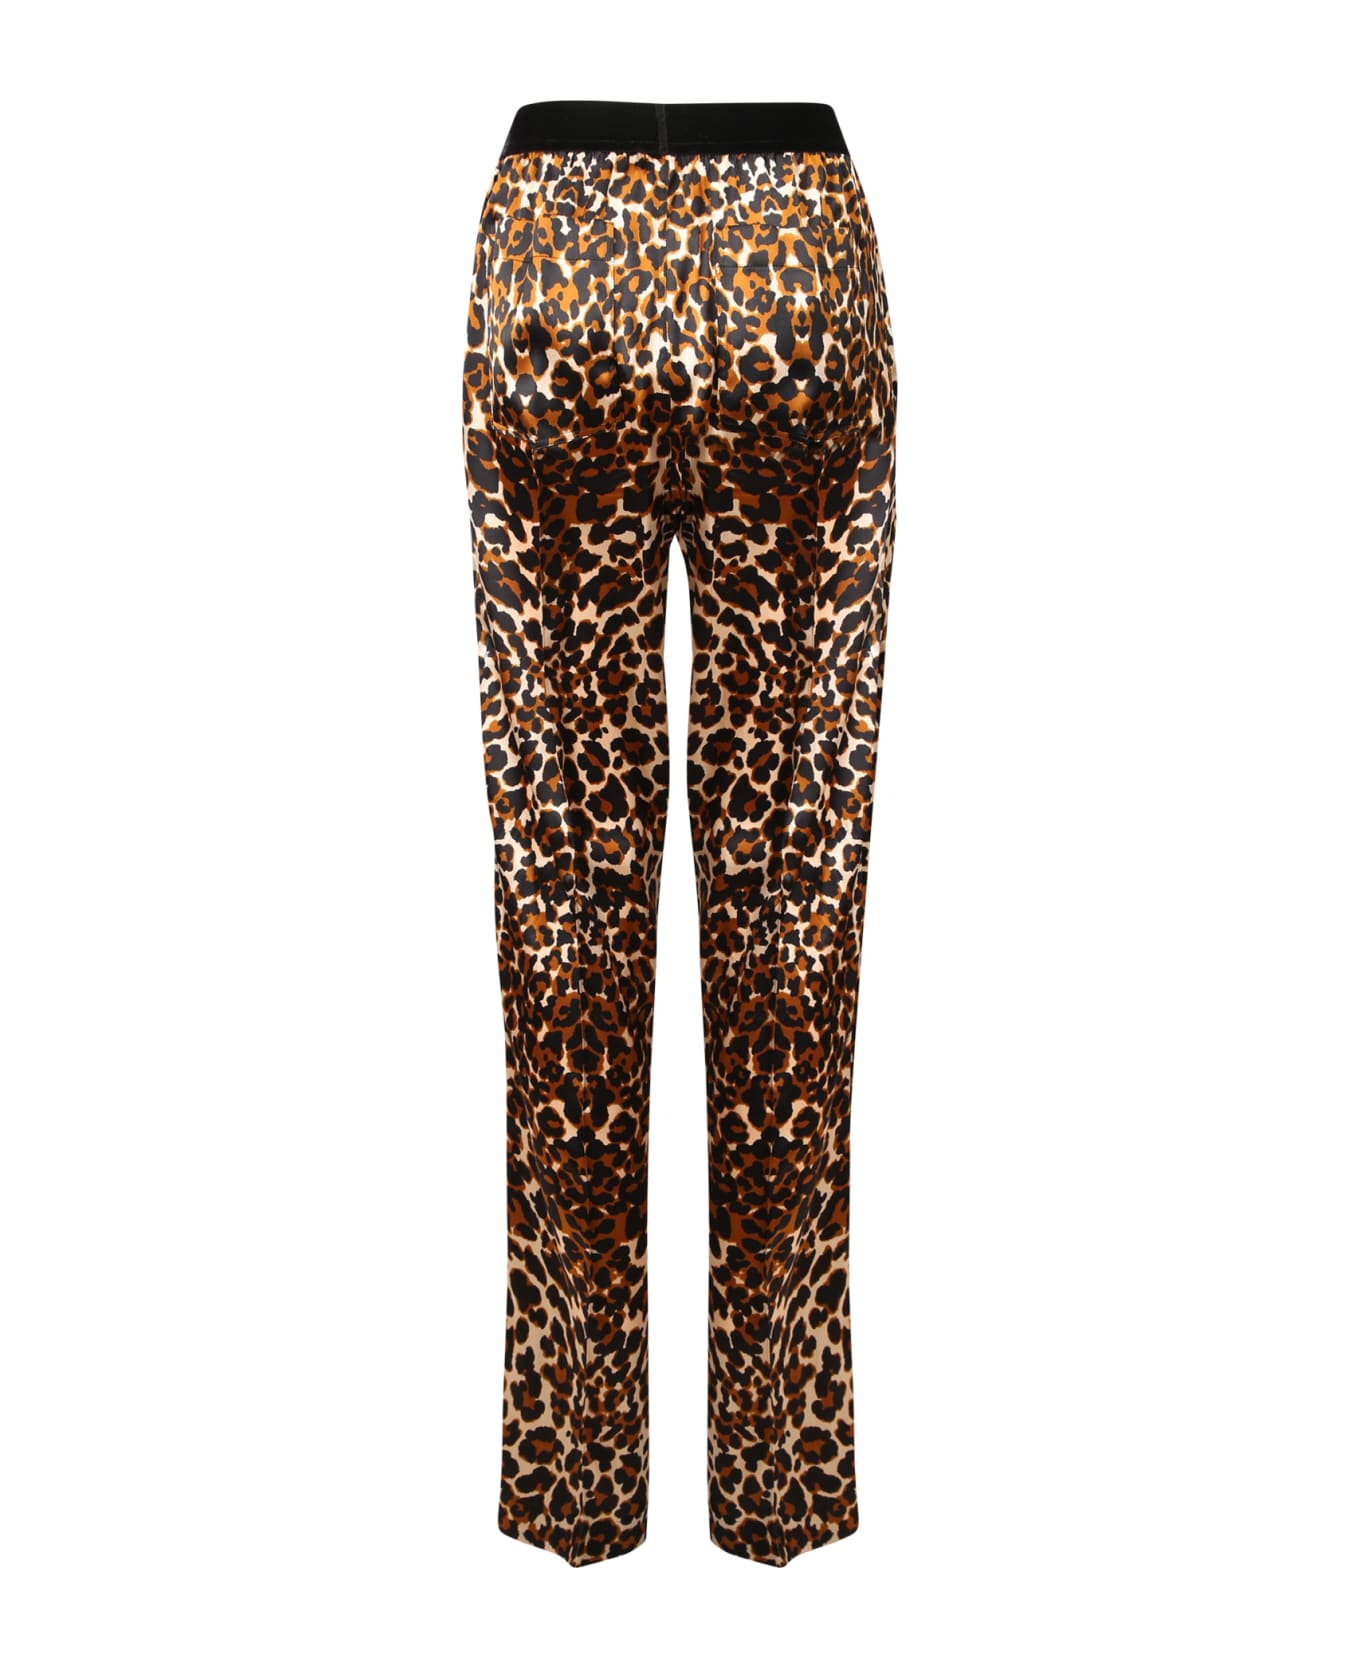 Tom Ford Trousers - Multi